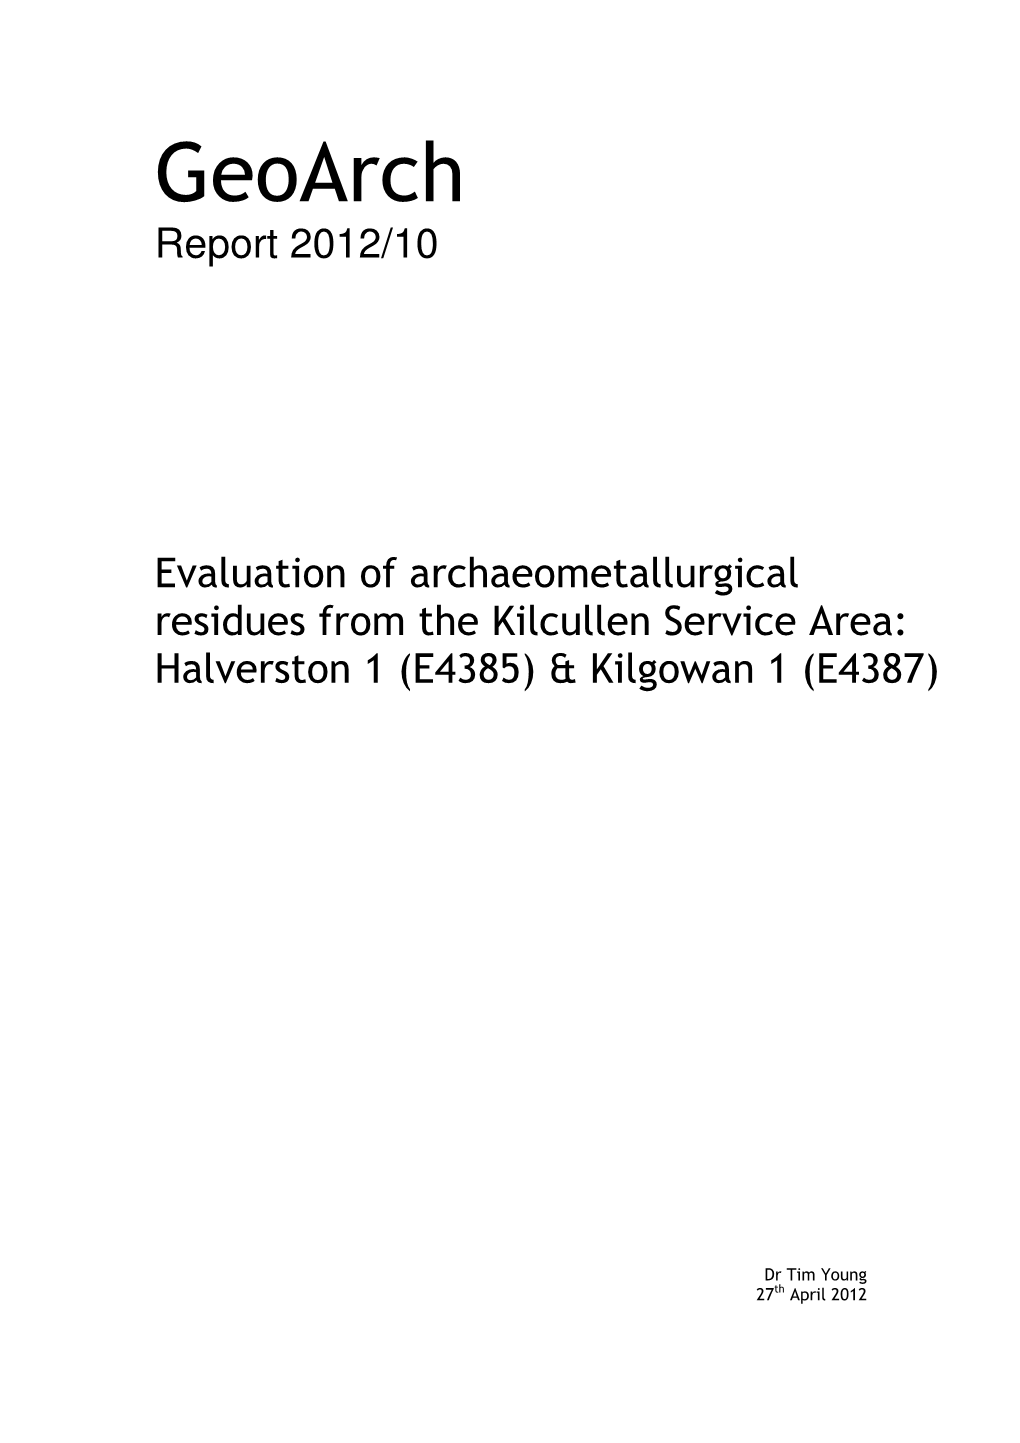 Geoarch Report 2012/10